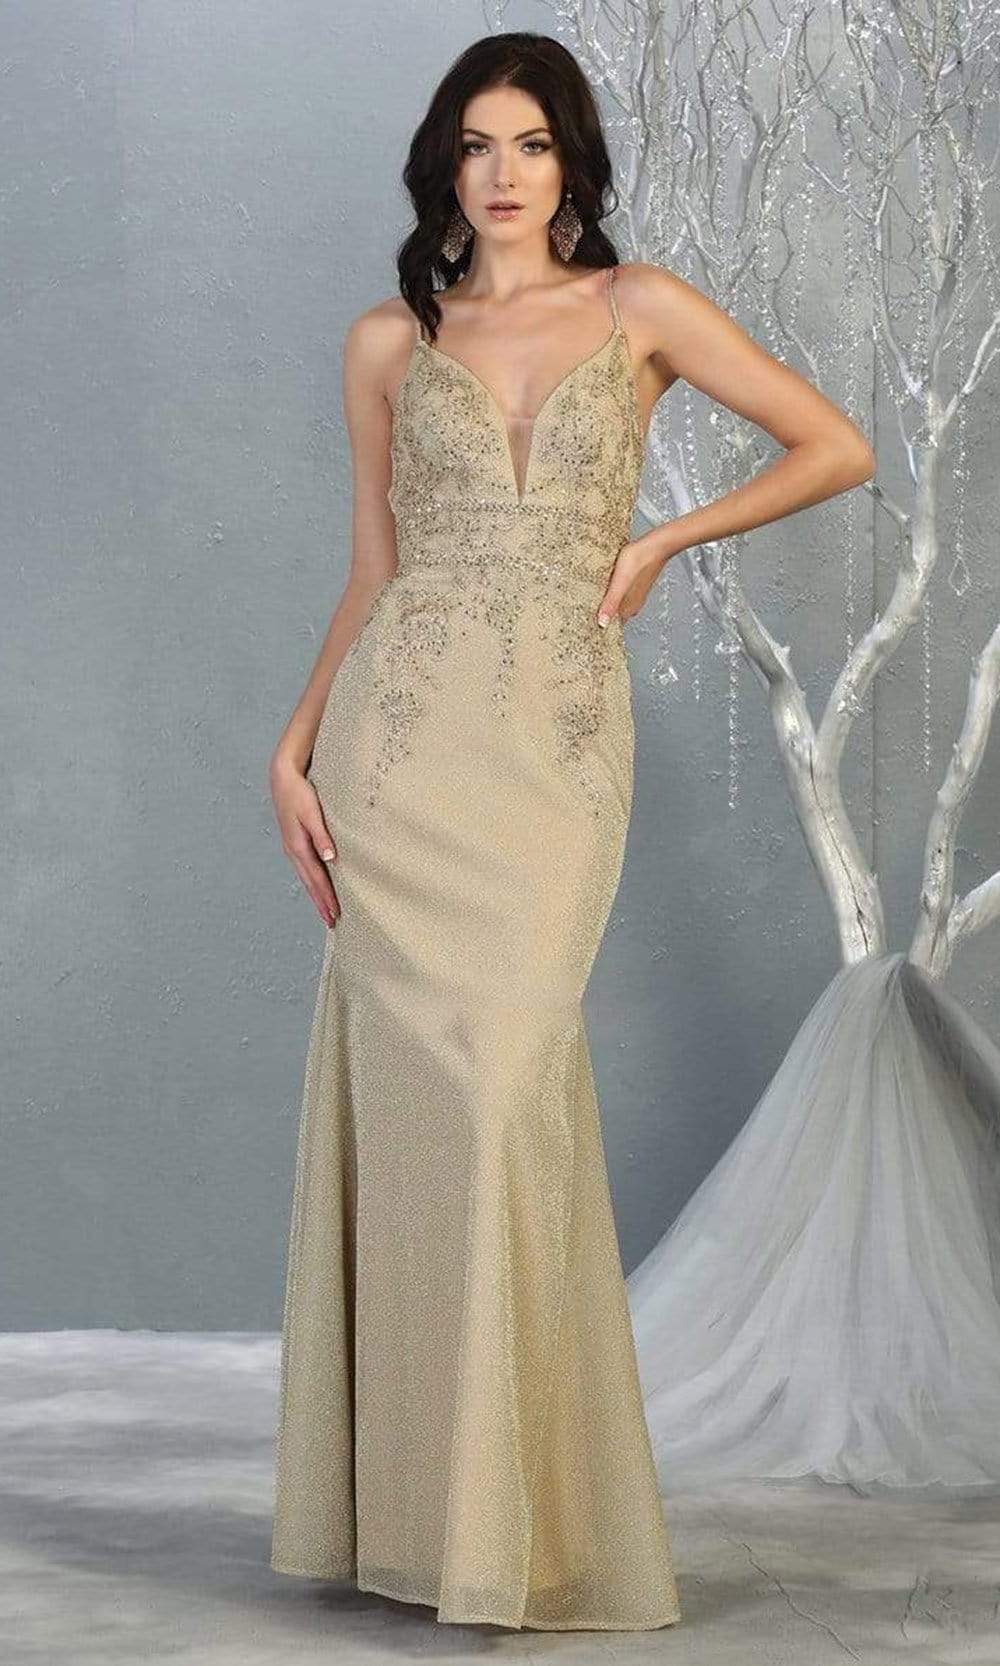 May Queen - MQ1796 Lace Applique-Ornate Trumpet Dress Evening Dresses 4 / Champagne/Gold